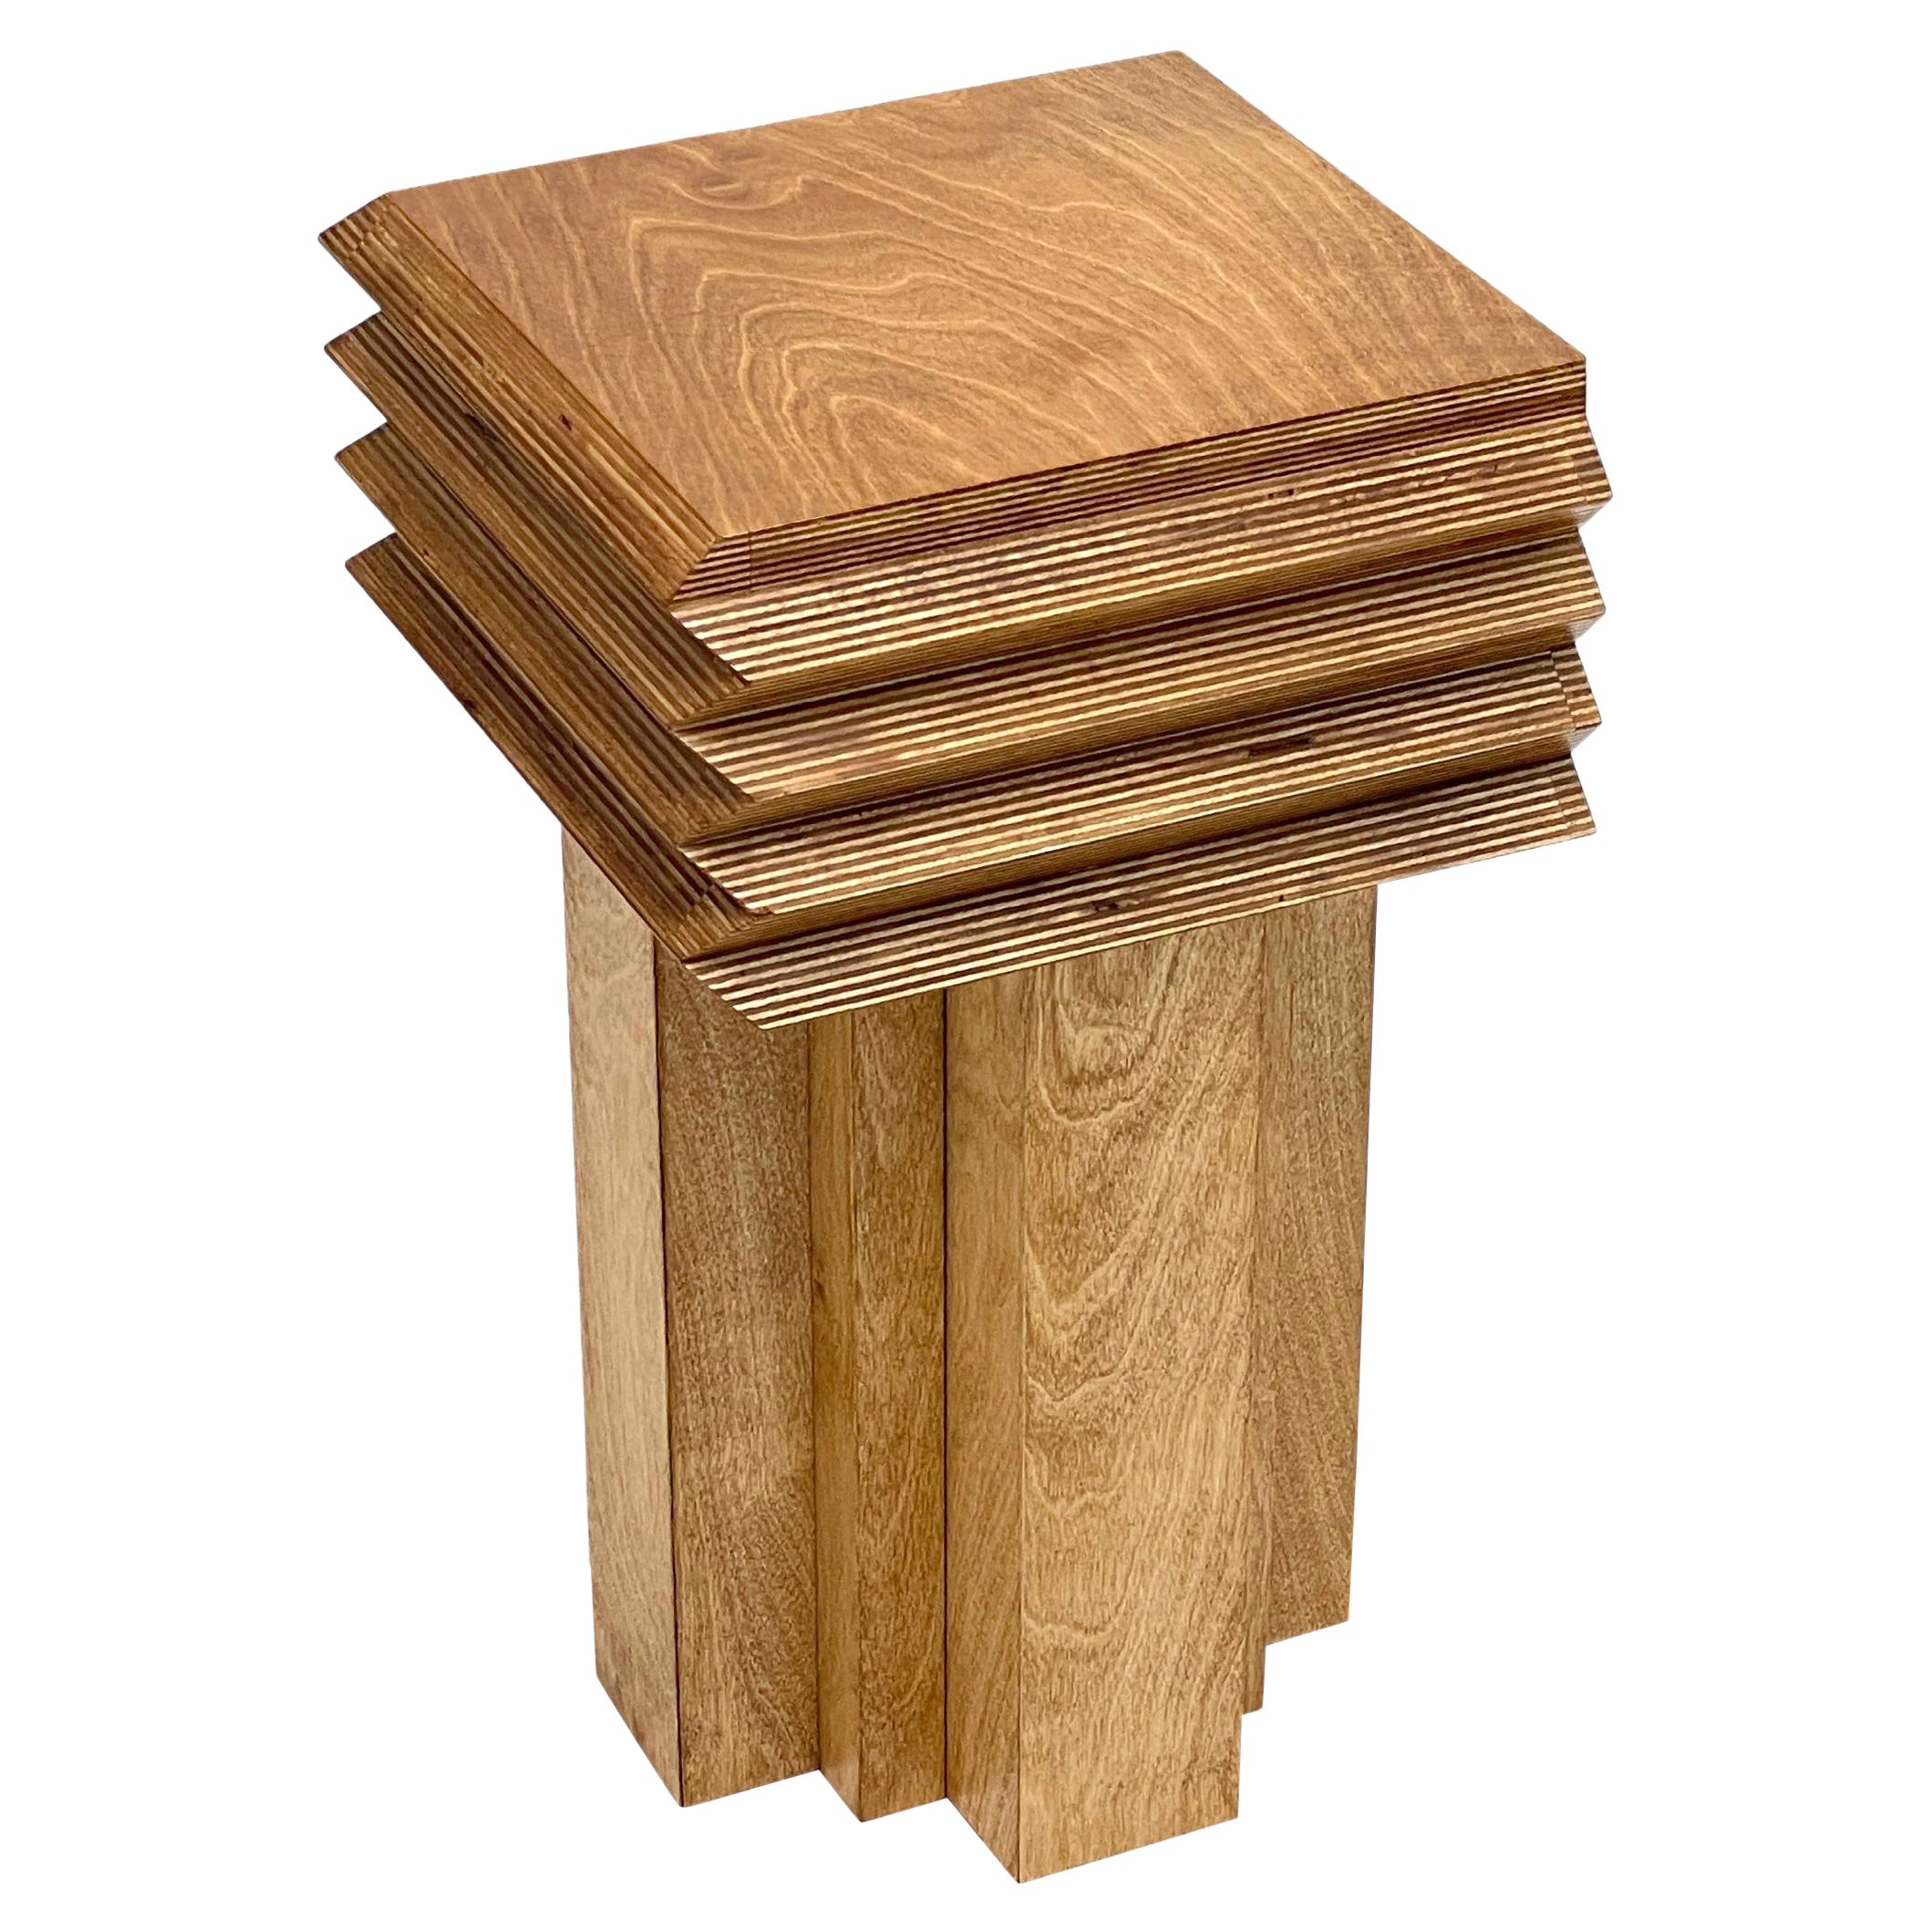 Mm Stool by Goons